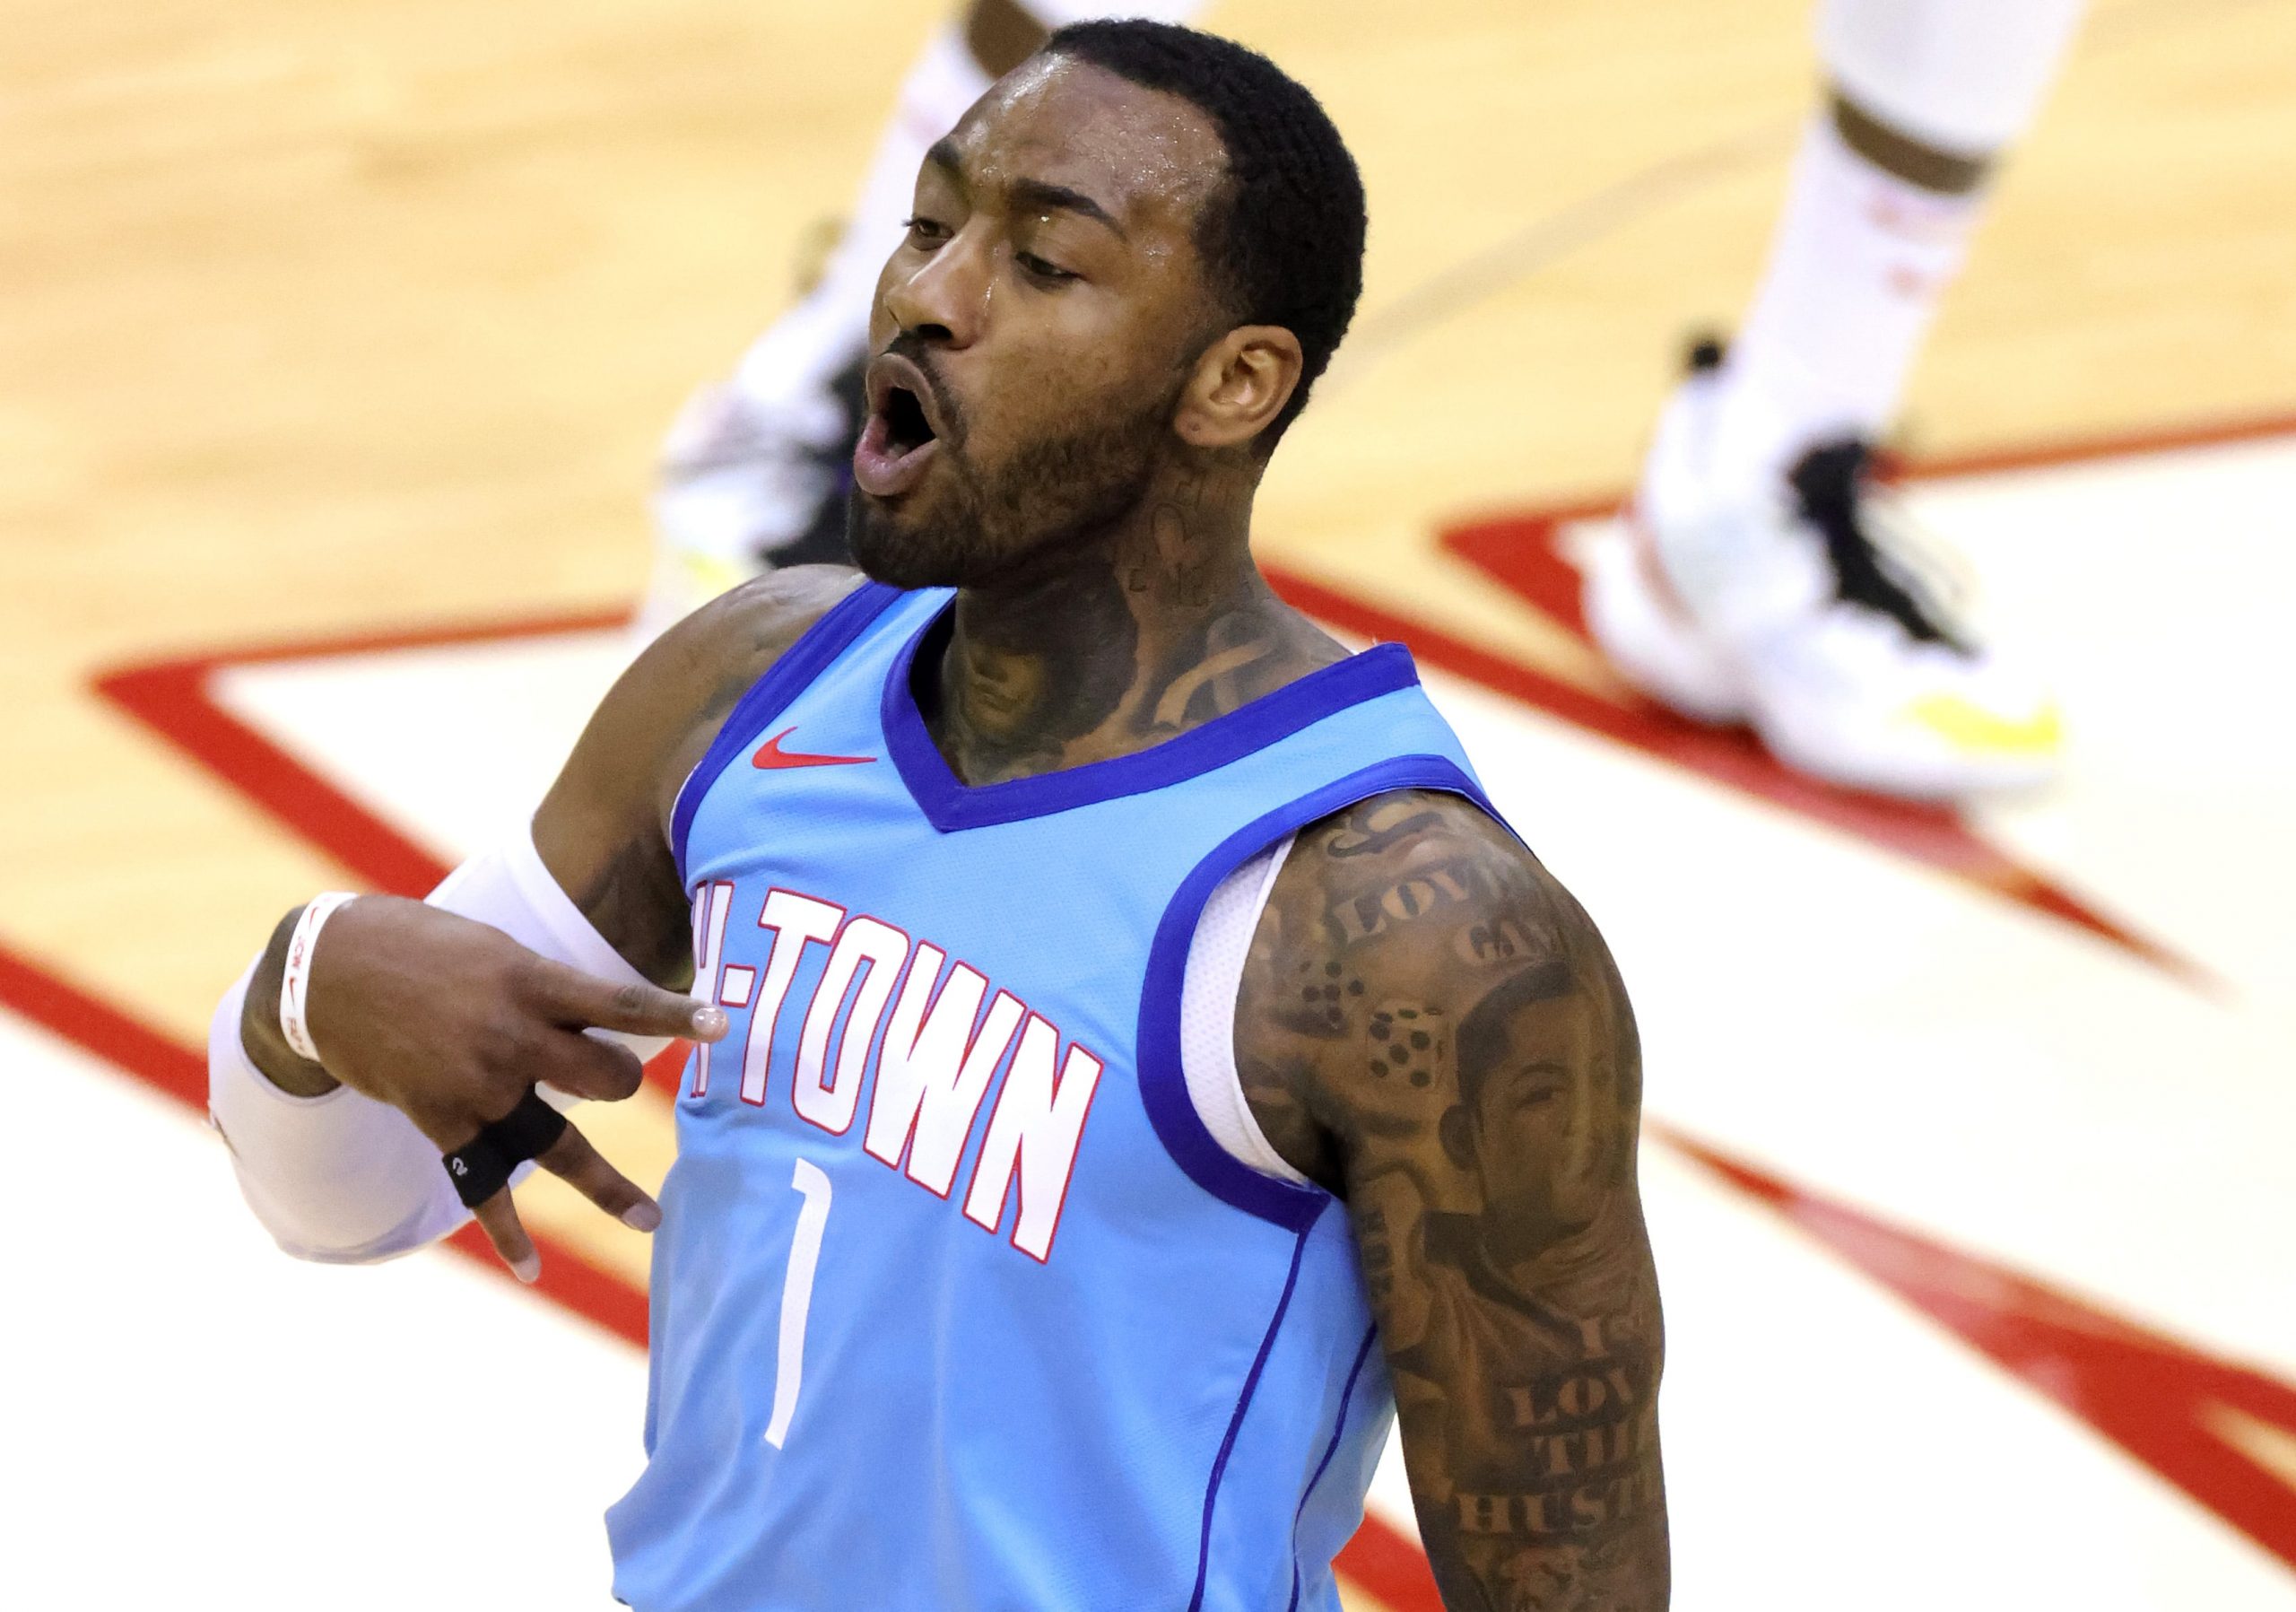 Houston Rockets guard John Wall celebrates making a three-pointer during win over Wizards